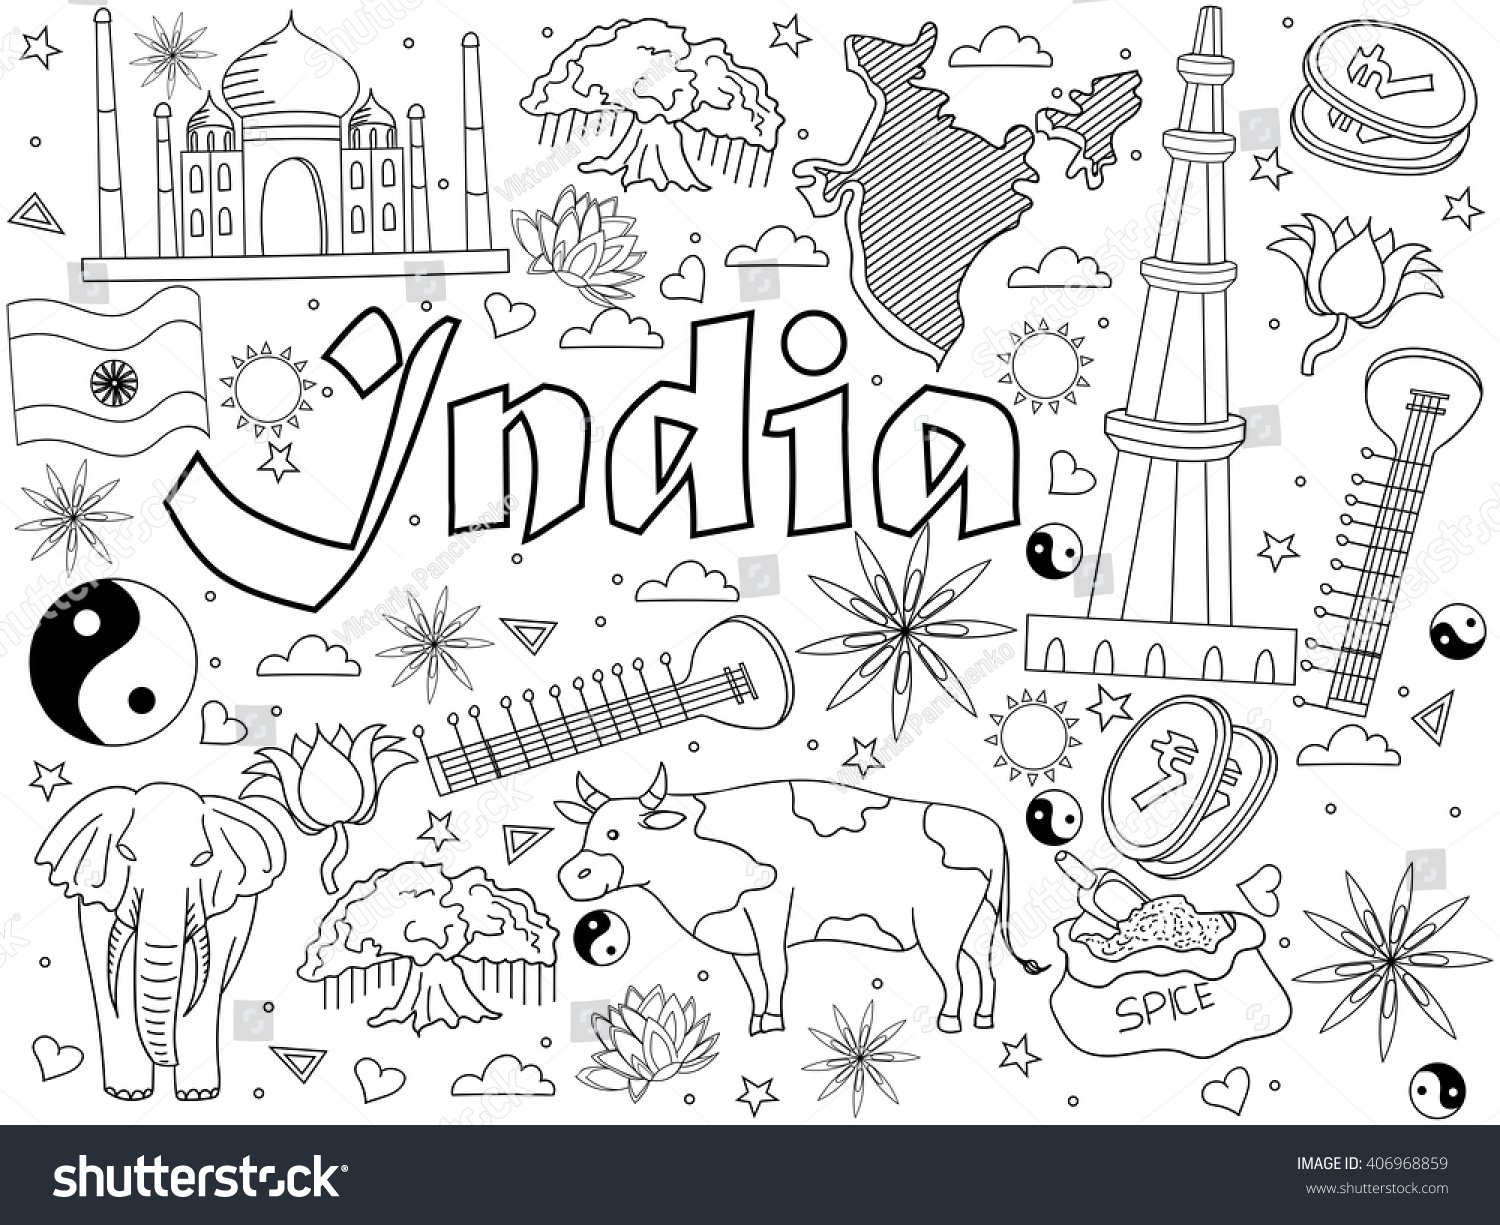 India coloring book line art design vector illustration. Separate objects. Hand drawn doodle design elements. #406968859